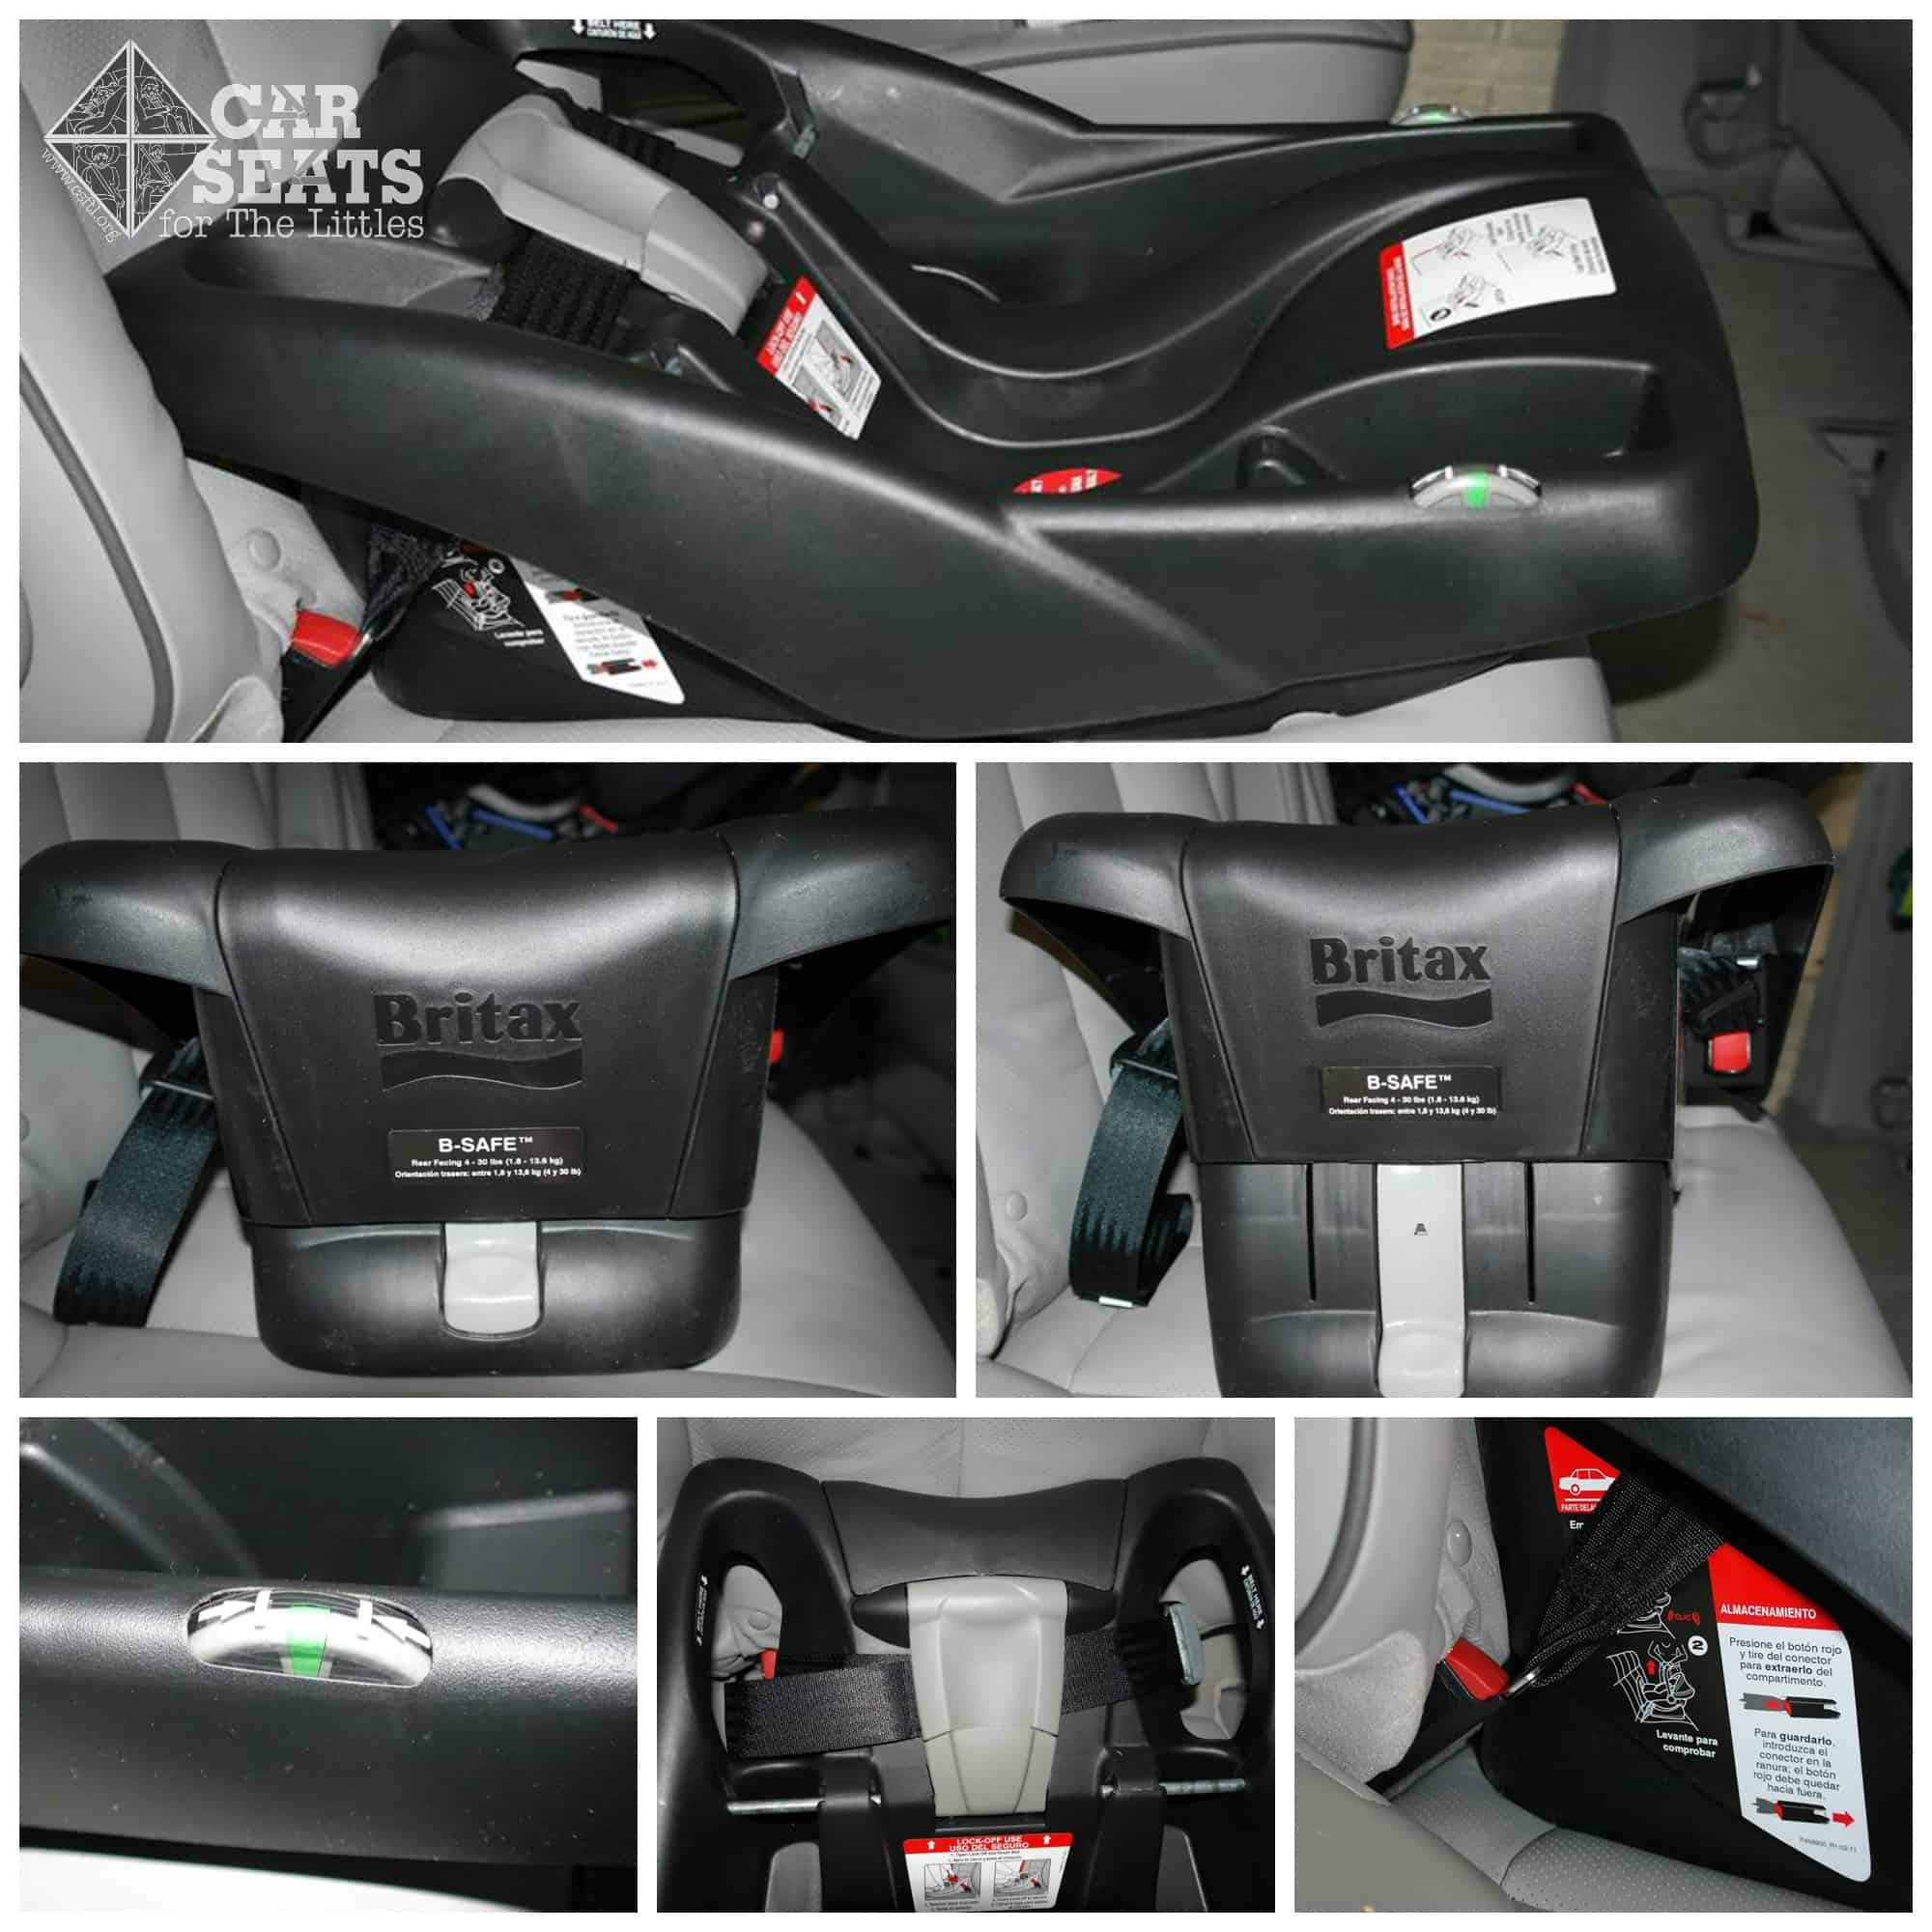 Britax B Safe Review Car Seats For The Littles - Britax Infant Car Seat Weight And Height Limit